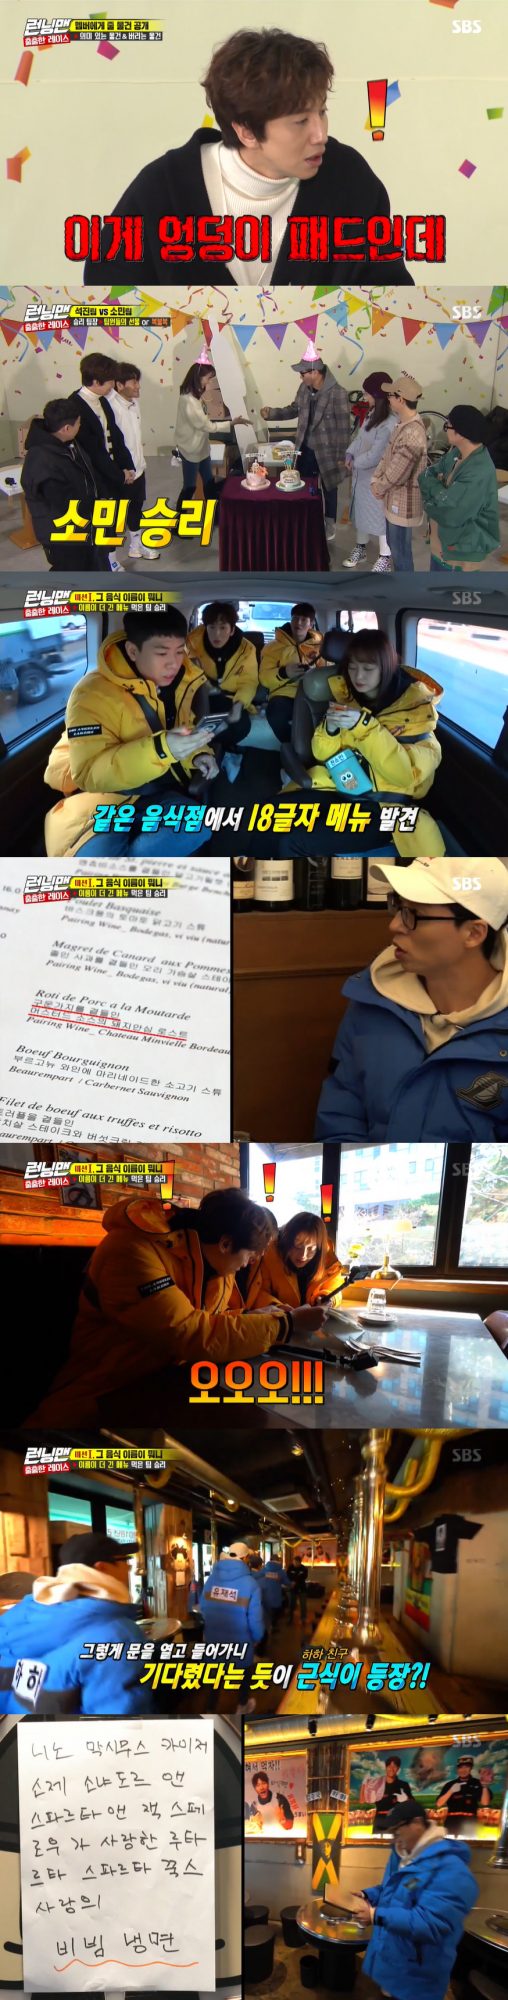 Jeon So-min won SBS Running Man but failed to win the product because he was greedy.Lee Kwang-soo, Ji Suk-jin carried out fresh cream bomb penaltiesOn the 9th broadcast Running Man, Race was held in commemoration of Ji Suk-jin birth & Jeon So-min publishing.Before the full-scale race, we talked about the recent situation of the members.Yoo Jae-Suk told Yang Se-chan that Yang Se-hyeong and YouTube were classified as Kids channels.Kim Jong-kook said, At first glance, the officials saw that this was a childrens broadcast.Haha also said, The computer is handling it, but it was classified as a Kids channel and the comment function was stopped. Yang Se-chan laughed, saying, The comment is blocked.He also wondered if the Yang Se-chan - Yang Se-hyeong brothers were classified as Kids channels when they played billiards and soo, Lee Kwang-soo said.Yang Se-chan also laughed, absurd.The members then asked the production team in advance to take out meaningful items and discarding items they brought.Ji Suk-jin said, I have been reminded of 10 years after receiving the text of the production team. It felt good that I could present it for our members.So I went to the department store with my wife. When I saw the item, I remembered Lee Kwang-soo.Thats it! Kim Jong-kook said, but this is not the way it is. Im not going to do it.The volume should go in more.Yang Se-chan said, Is not it that you saw the movie Taja - One Eyed Jack in this movie? Lee Kwang-soo made a backward exposure.Lee Kwang-soo said, I am grateful to my sister-in-law anyway.On the day, Race was divided into Ji Suk-jin and Jeon So-min, who took charge of the team.Each team can take the product by choosing a meaningful gift or a 100-inch TV Bokbulbok Show brought by the members through the confrontation.If you choose a 100-inch TV and can not take it, you can change it to a gift certificate of 8 million won.Ji Suk-jin teamed up with Song Ji-hyo, Yoo Jae-Suk and Haha, while Jeon So-min teamed up with Kim Jong-kook, Yang Se-chan and Lee Kwang-soo.The first mission was to find food with a longer name.The Ji Suk-jin team went to Itaewon for 22 letters of food, and the Jeon So-min team headed to Yeonnam-dong for 18 letters of food.Arriving at a restaurant in Itaewon, the Ji Suk-jin team found the 22-letter menu, which was originally intended to eat, sold out due to material exhaustion.Fortunately, however, I found another menu with 22 letters: Yoo Jae-Suk suggested that the passer-by should choose a number and decide that the number person eats food.The pig relief roast cooked with the Soubid technique was available to Yoo Jae-Suk and also acquired a product badge.Arriving at the restaurant, the Jeon So-min team found 27-letter menus more than 18 letters; the Jeon So-min team ate food by Jeon So-min.At that time, the Ji Suk-jin team heard that the Jeon So-min team had found a 27-letter menu; while searching, Haha found 45-letter food.The Jeon So-min team also found 31 letters of food in another store.The Ji Suk-jin team visited a meat restaurant run by Haha and Kim Jong-kook. The restaurant had a friend of Hahas.The walls and menus of the restaurant featured a precipitous, 47-letter bibim cold noodle menu, even with the letters not the 45, which Haha had said, but the 47.The production team said that if it explains the difference between ordinary bibim cold noodles, it will admit it.The menu tasting was done by Song Ji-hyo, and the production team acknowledged Song Ji-hyos product badge after the discussion, but failed the mission.If we admit this, well make a menu for that team, the team said. The first round match was won by the Jeon So-min team, who found 31-letter food.The second round was to be met with a memorable CF ambassador. The problem was a drink CF starring Jun Ji-hyun and Jo In-sung, Shi Chonggui.It was a movie-like CF about the situation where Jun Ji-hyun was caught dating another man over his boyfriend Jo In-sung.Song Ji-hyo and Ji Suk-jin succeeded in getting the line Love feeds you? Lie things do not deserve to love!The second problem was a coffee drink CF that created the famous ambassador, I think I am going to be an elderly person.Haha and Song Ji-hyo were quoted as sick and look more beautiful. In the ensuing problems, the Jeon So-min team tied two to two in a row.The last problem was Shi Chonggui, a plum drink CF starring Jang Na-ra and Kim Jae-won.Jeon So-min, who was immersed in the acting of a lover with Yang Se-chan, laughed at Yang Se-chan by spraying water on his face like CF.Lee Kwang-soo was angry at Kim Jong-kook, who came out as an opponent, by spraying bottled water.In the next challenge, Kim Jong-kook changed his role and sprayed Lee Kwang-soo with water on his face, but they said, Love is not pink.Green. The final result was 3-2, and the team won.The members put one badge on the product and solved the bonus problem. The problem that Shi Chonggui was CF with Han Seok-gyu and Shim Eun-ha.The final result was that Jeon So-min took the opportunity to get the product.Instead of sharing gifts with members, Jeon So-min chose the 100-inch TV Bokbulbok Show worth 8 million won.Jeon So-min picked the No. 1 at the Bokbulbok Show but was blue.Jeon So-min had only gotten a U.S. navigation 10 years ago, which Ji Suk-jin had brought to the thing to throw away.But there was a fact in this race that Ji Suk-jin and Jeon So-min did not know.There was no newer 100-inch TV in the first place in the Bokbulbok Show Choices.Other members knew in advance that if they were greedy and Choices TV, they would take nothing. Im sorry, said Jeon So-min.I will live nicely. Lee Kwang-soo and Ji Suk-jin were also punished for fresh cream bombs.